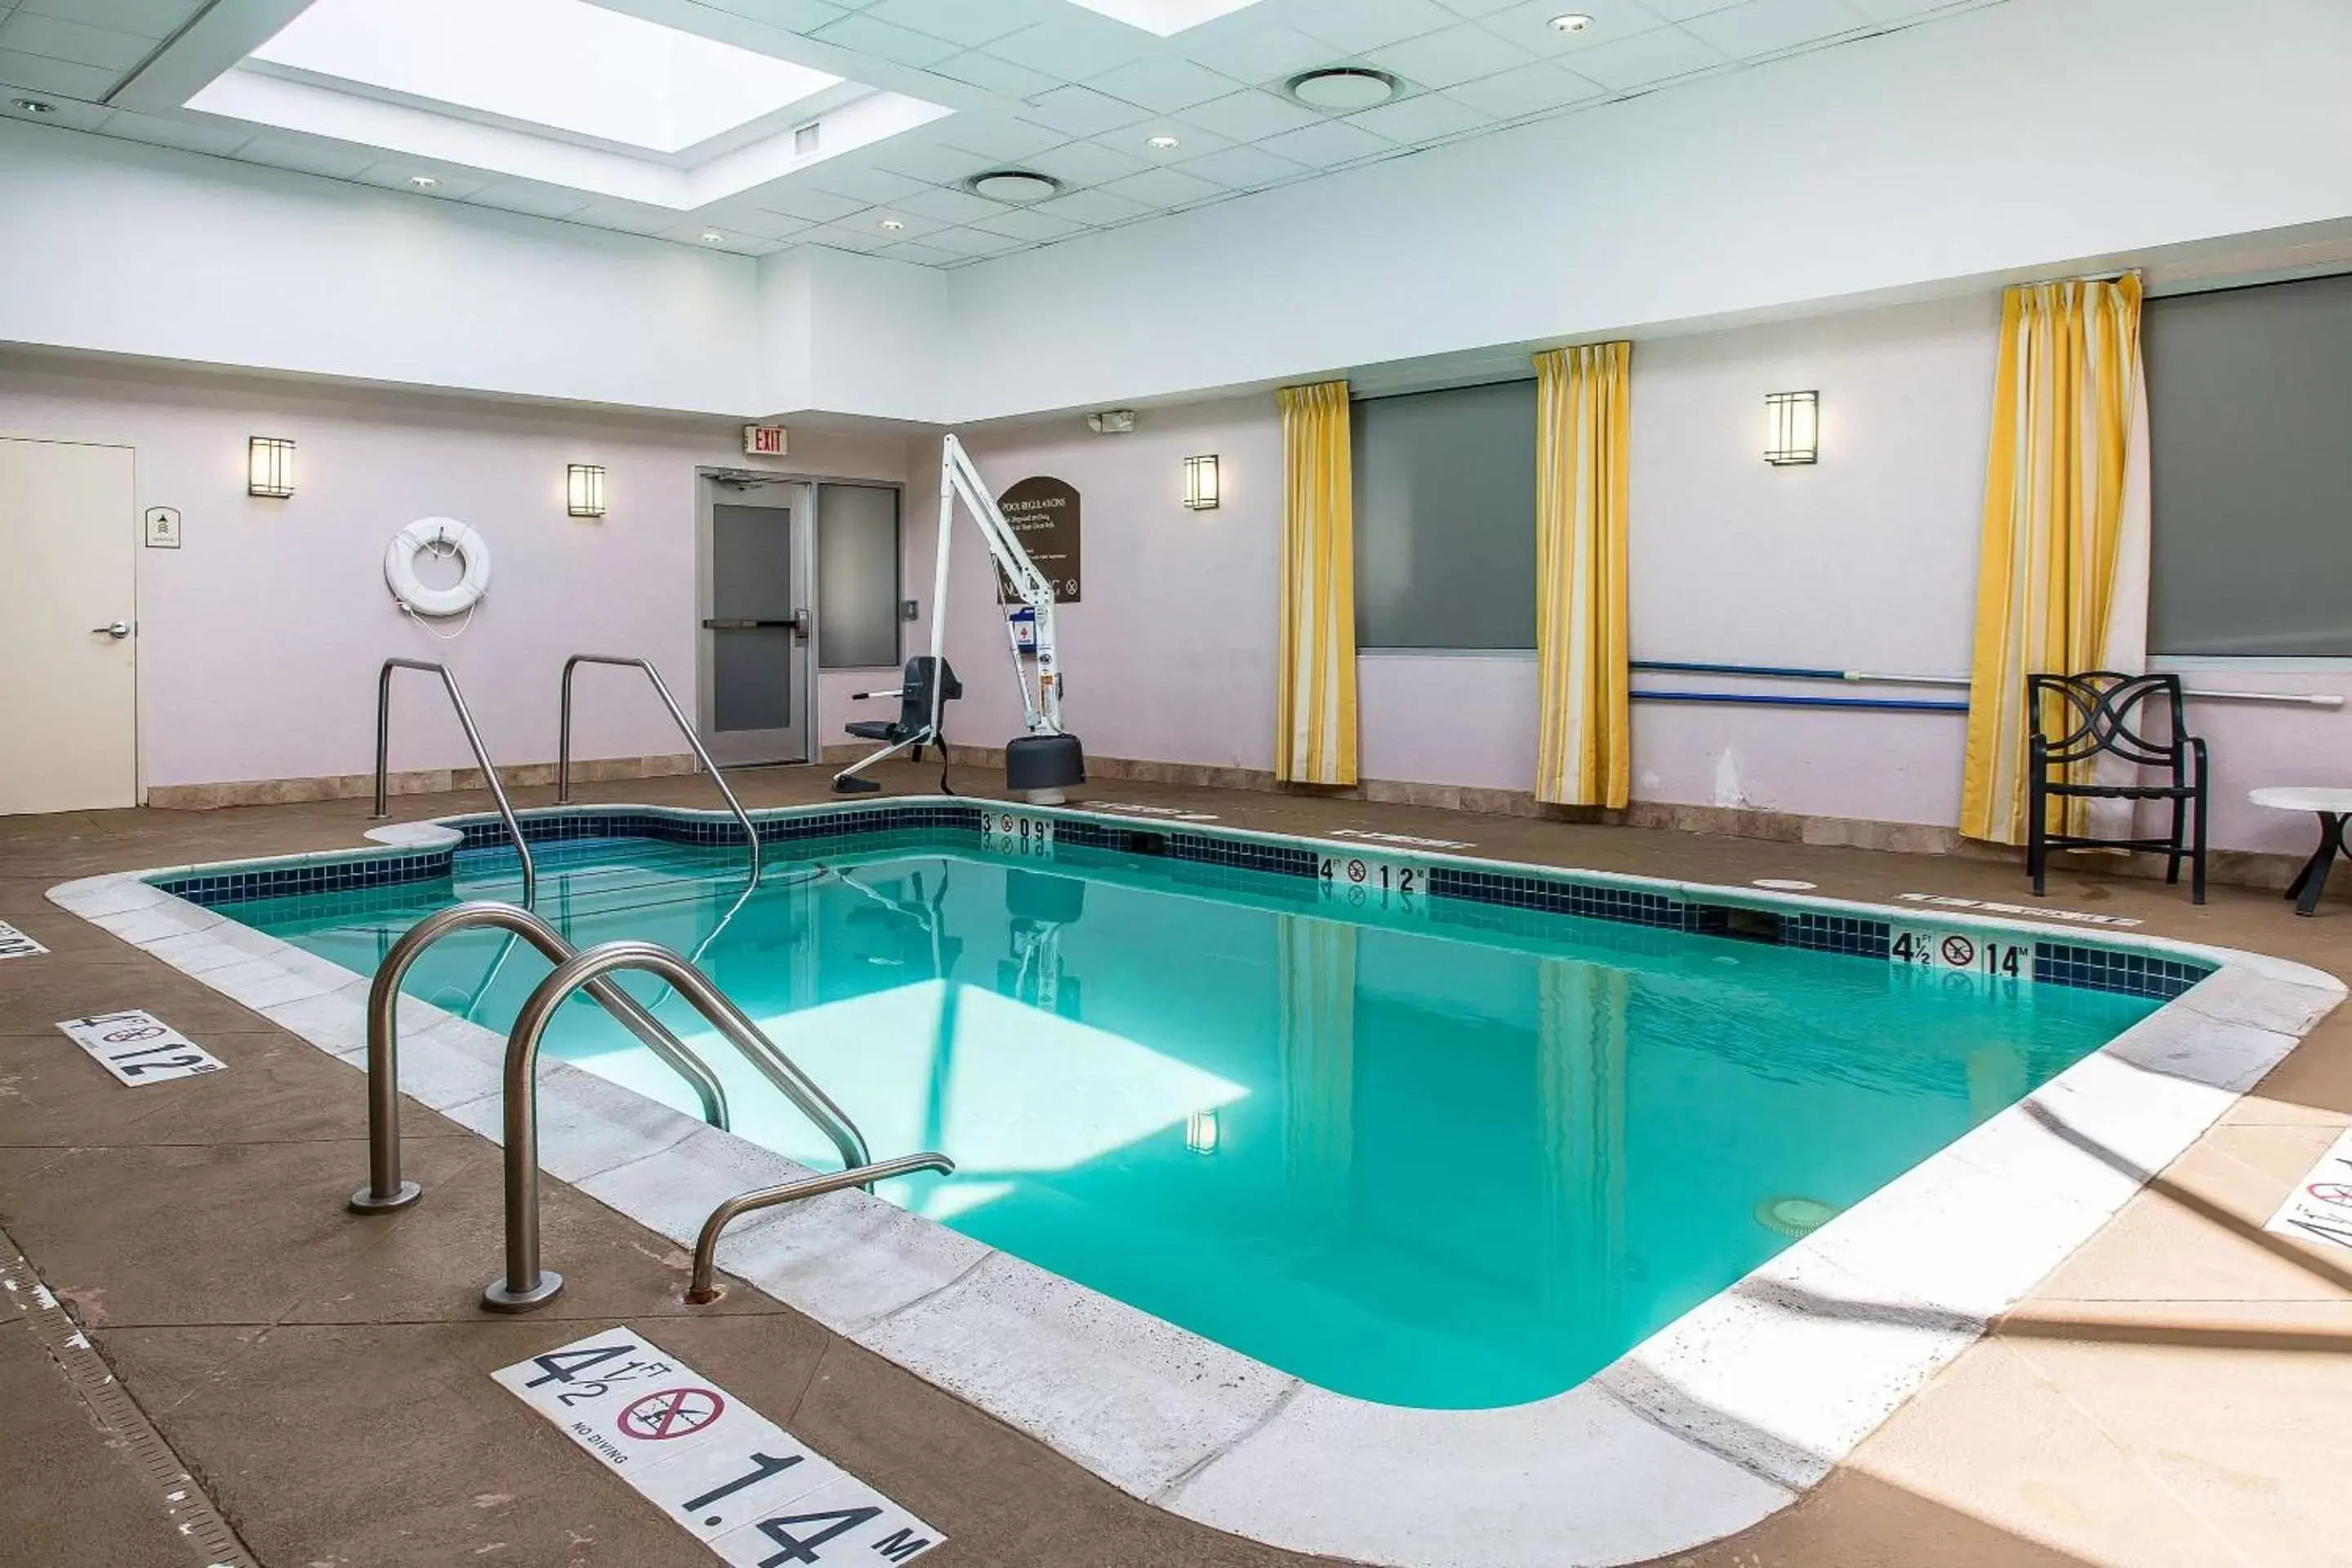 On site, Swimming Pool in Clarion Hotel & Suites Hamden - New Haven